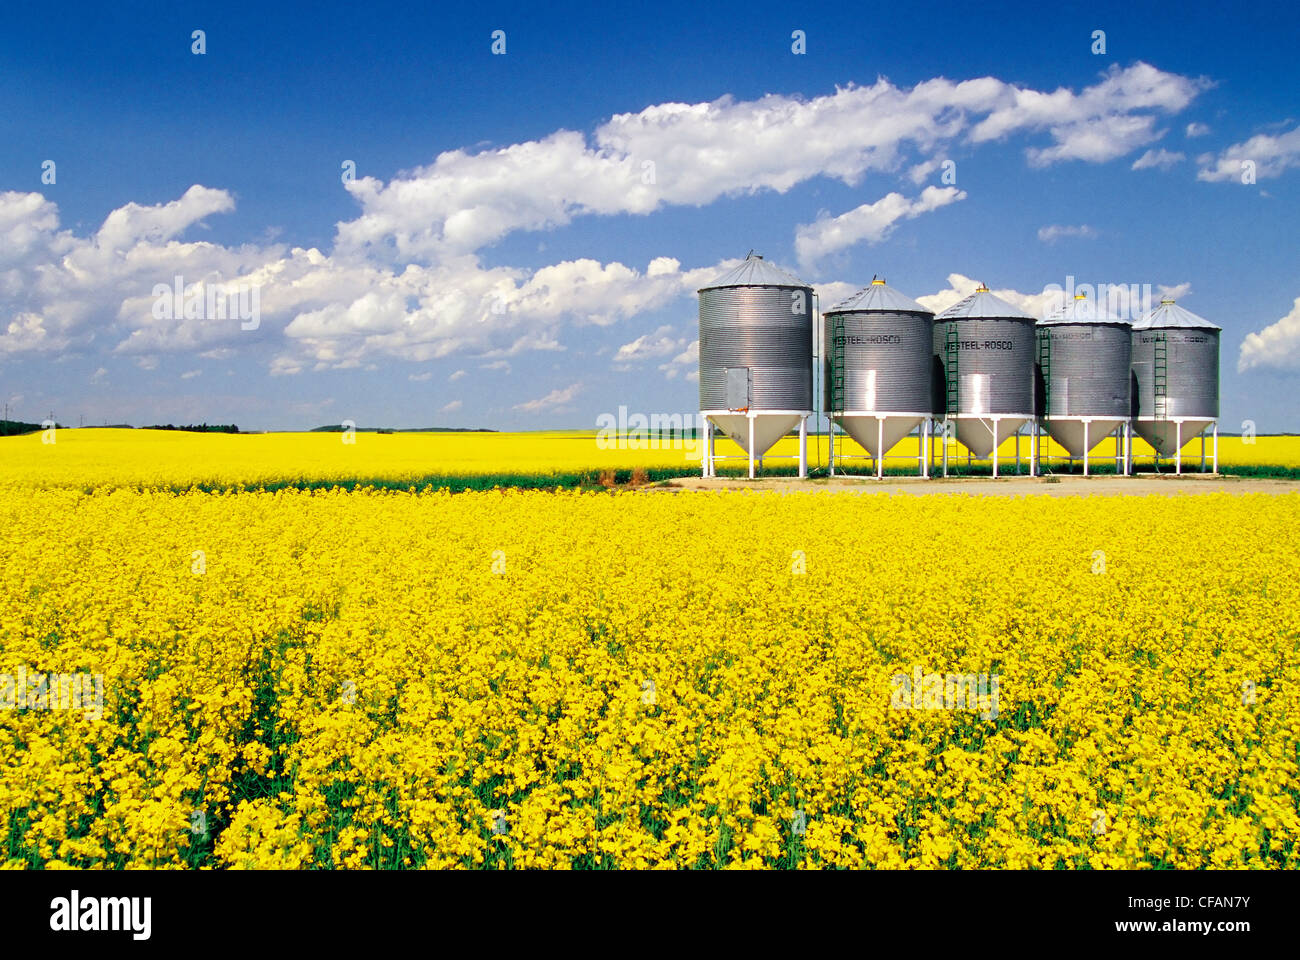 Blooming canola field with grain bins in the background, Tiger Hills, Manitoba, Canada Stock Photo